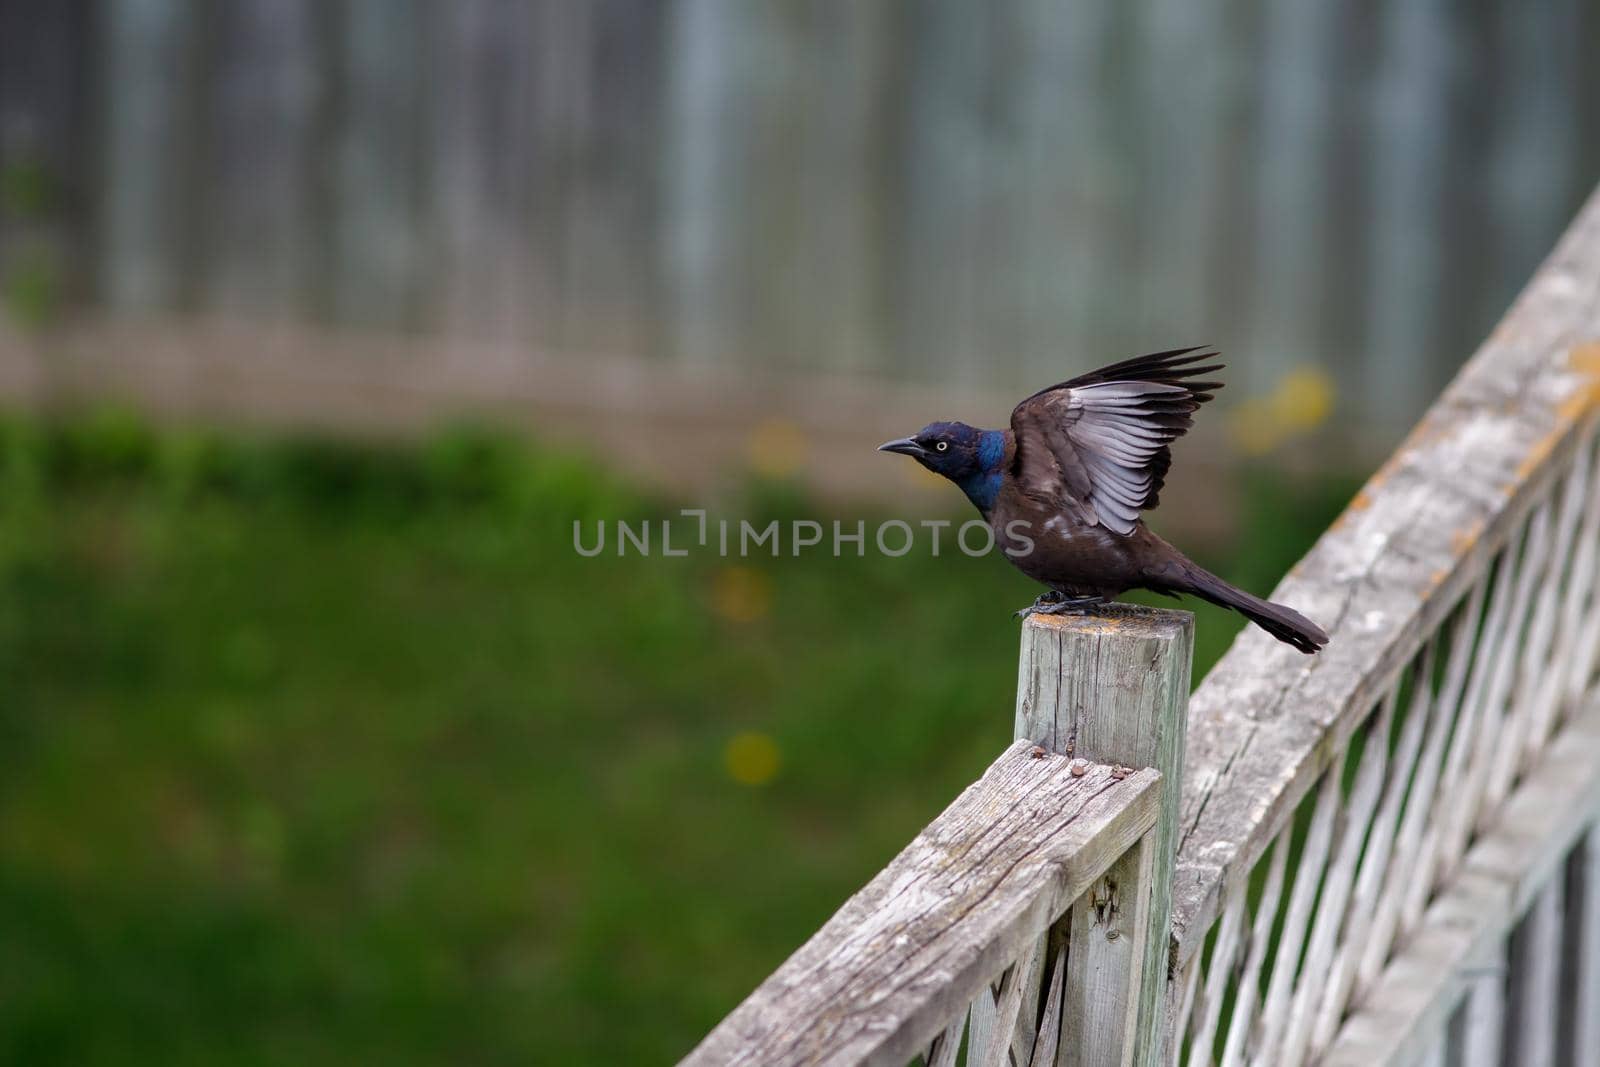 A common grackle (Quiscalus quiscula) is perched on a fence post, with the bird's wings raised up.